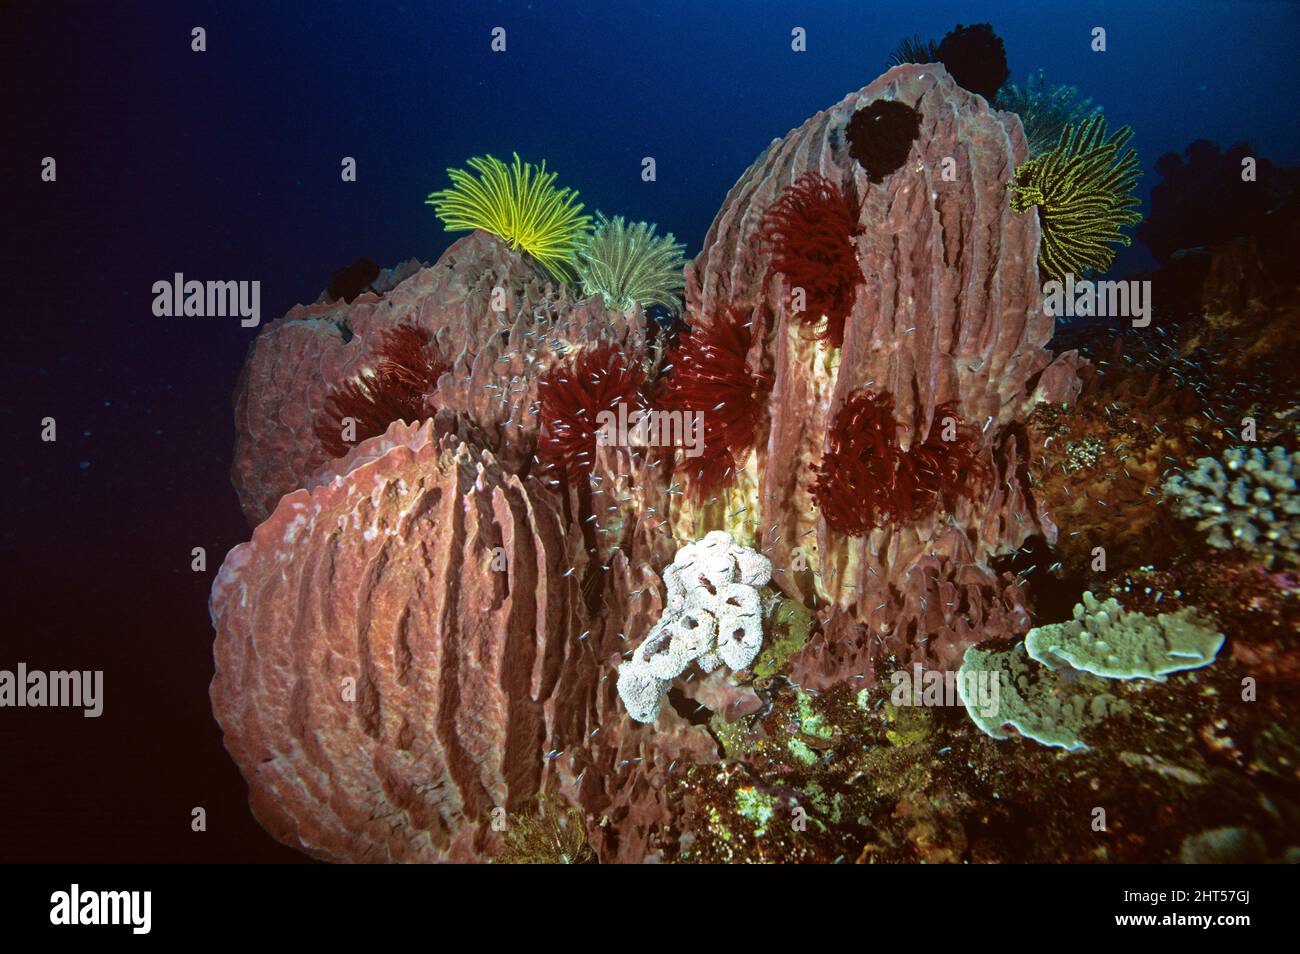 Barrel sponges (Xestospongia sp.), group of large sponges, crowned with Feather stars. Stock Photo